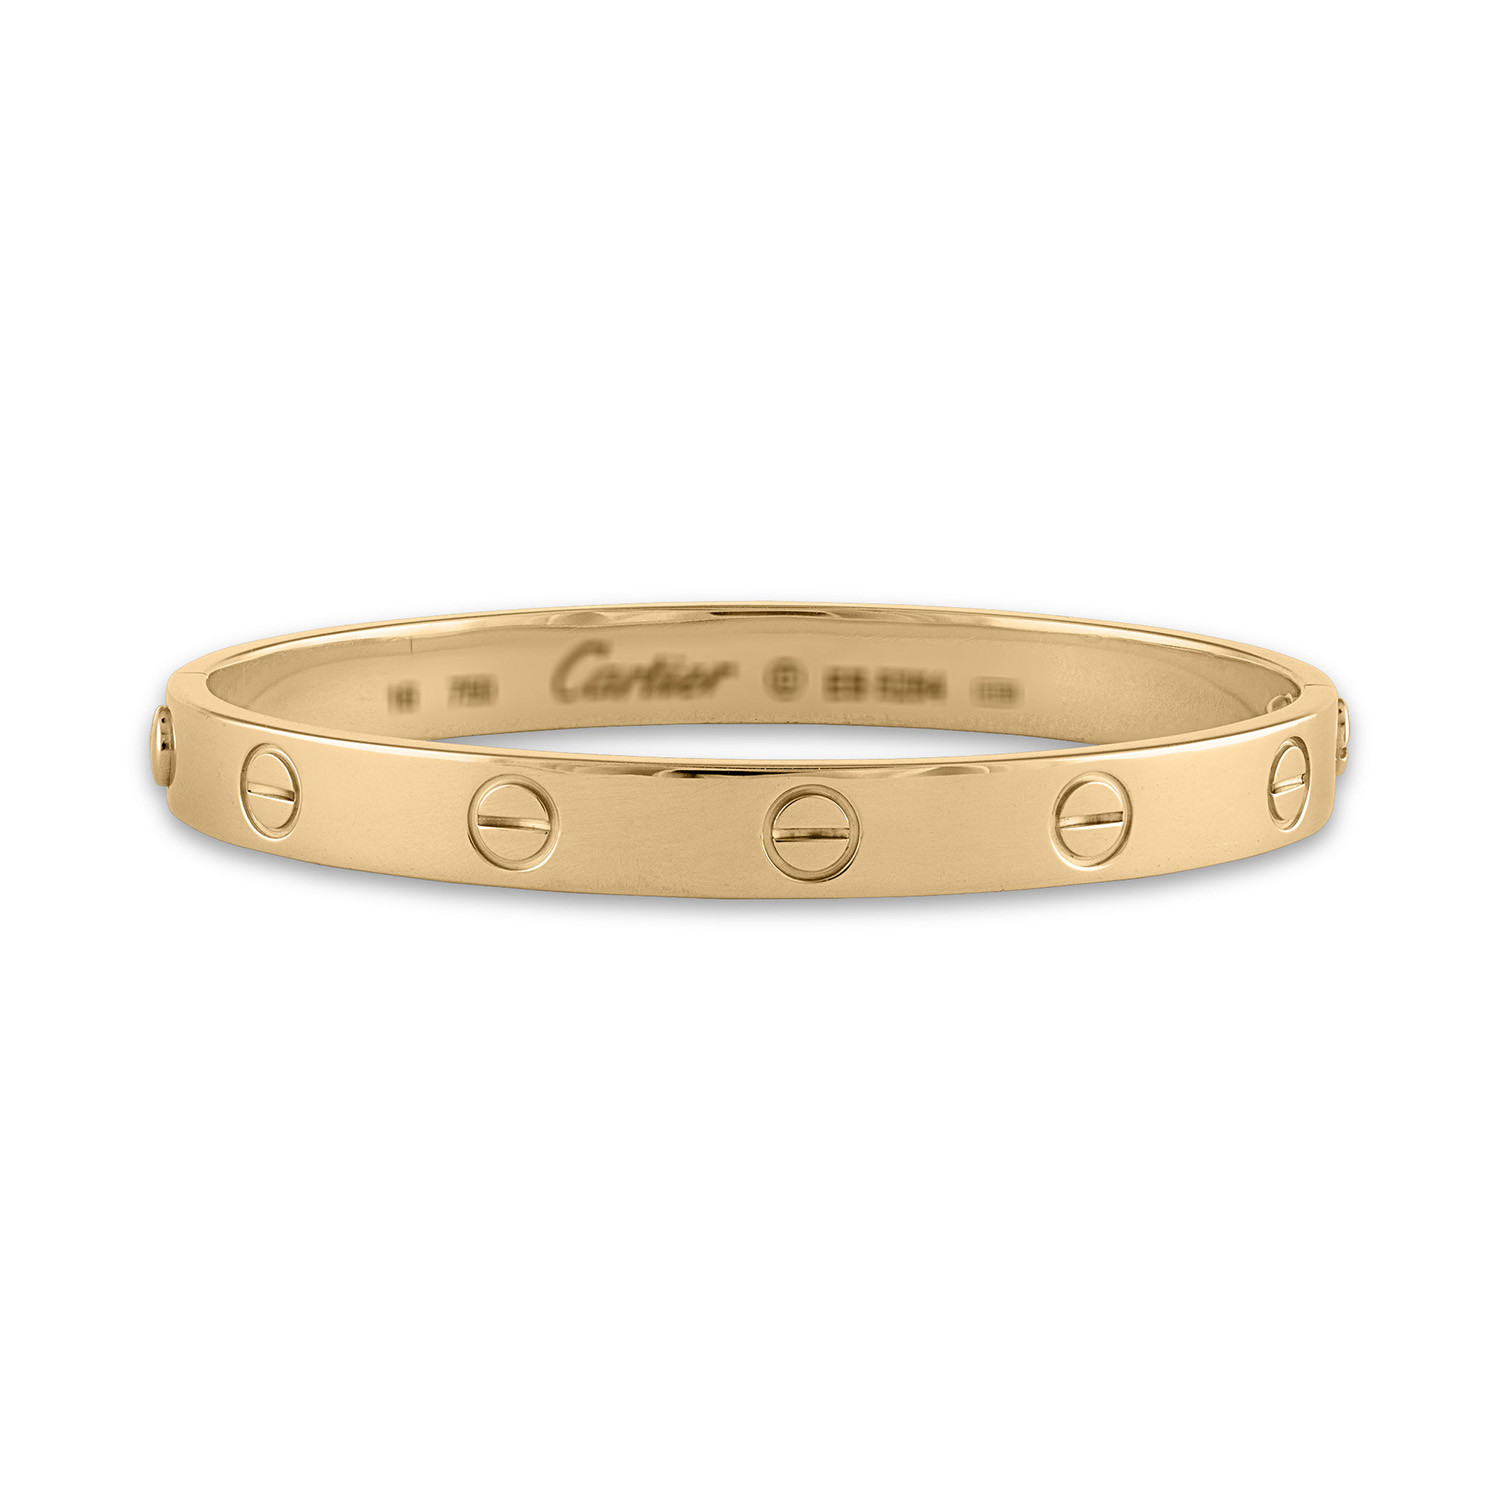 Cartier 18k Yellow Gold Love Bracelet Size 16cm Pre Owned Dazzling Designer Jewelry Touch Of Modern